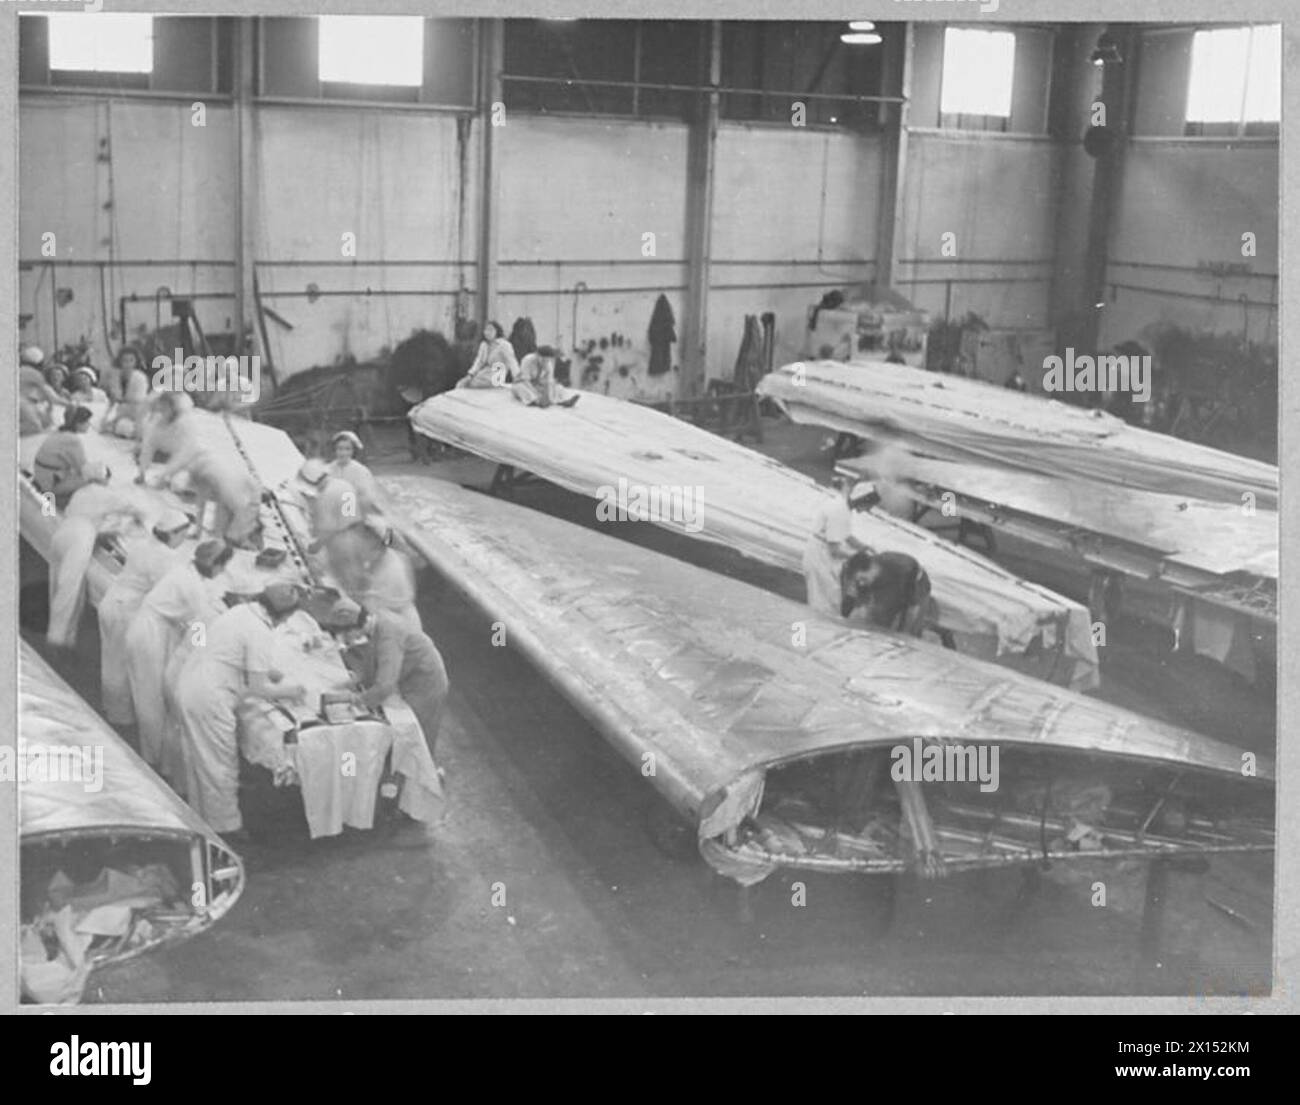 BRITAIN'S RECORD AIRCRAFT PRODUCTION ASSEMBLY OF 'WELLINGTON' BOMBERS - Stretching fabric on a wing Royal Air Force Stock Photo